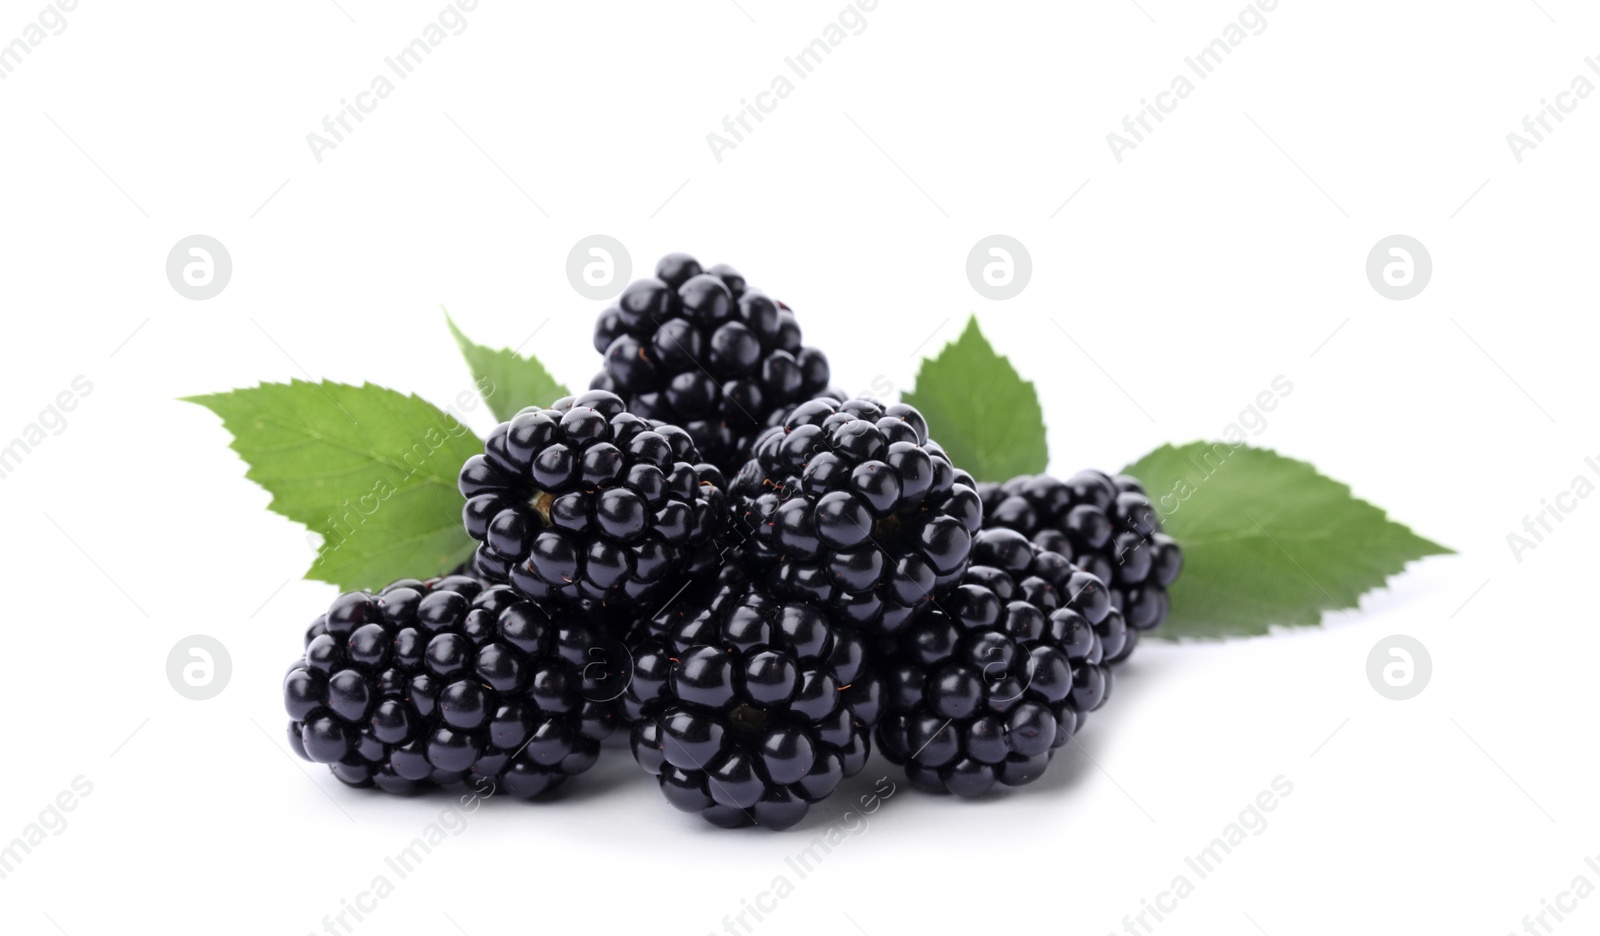 Photo of Pile of tasty ripe blackberries with green leaves on white background